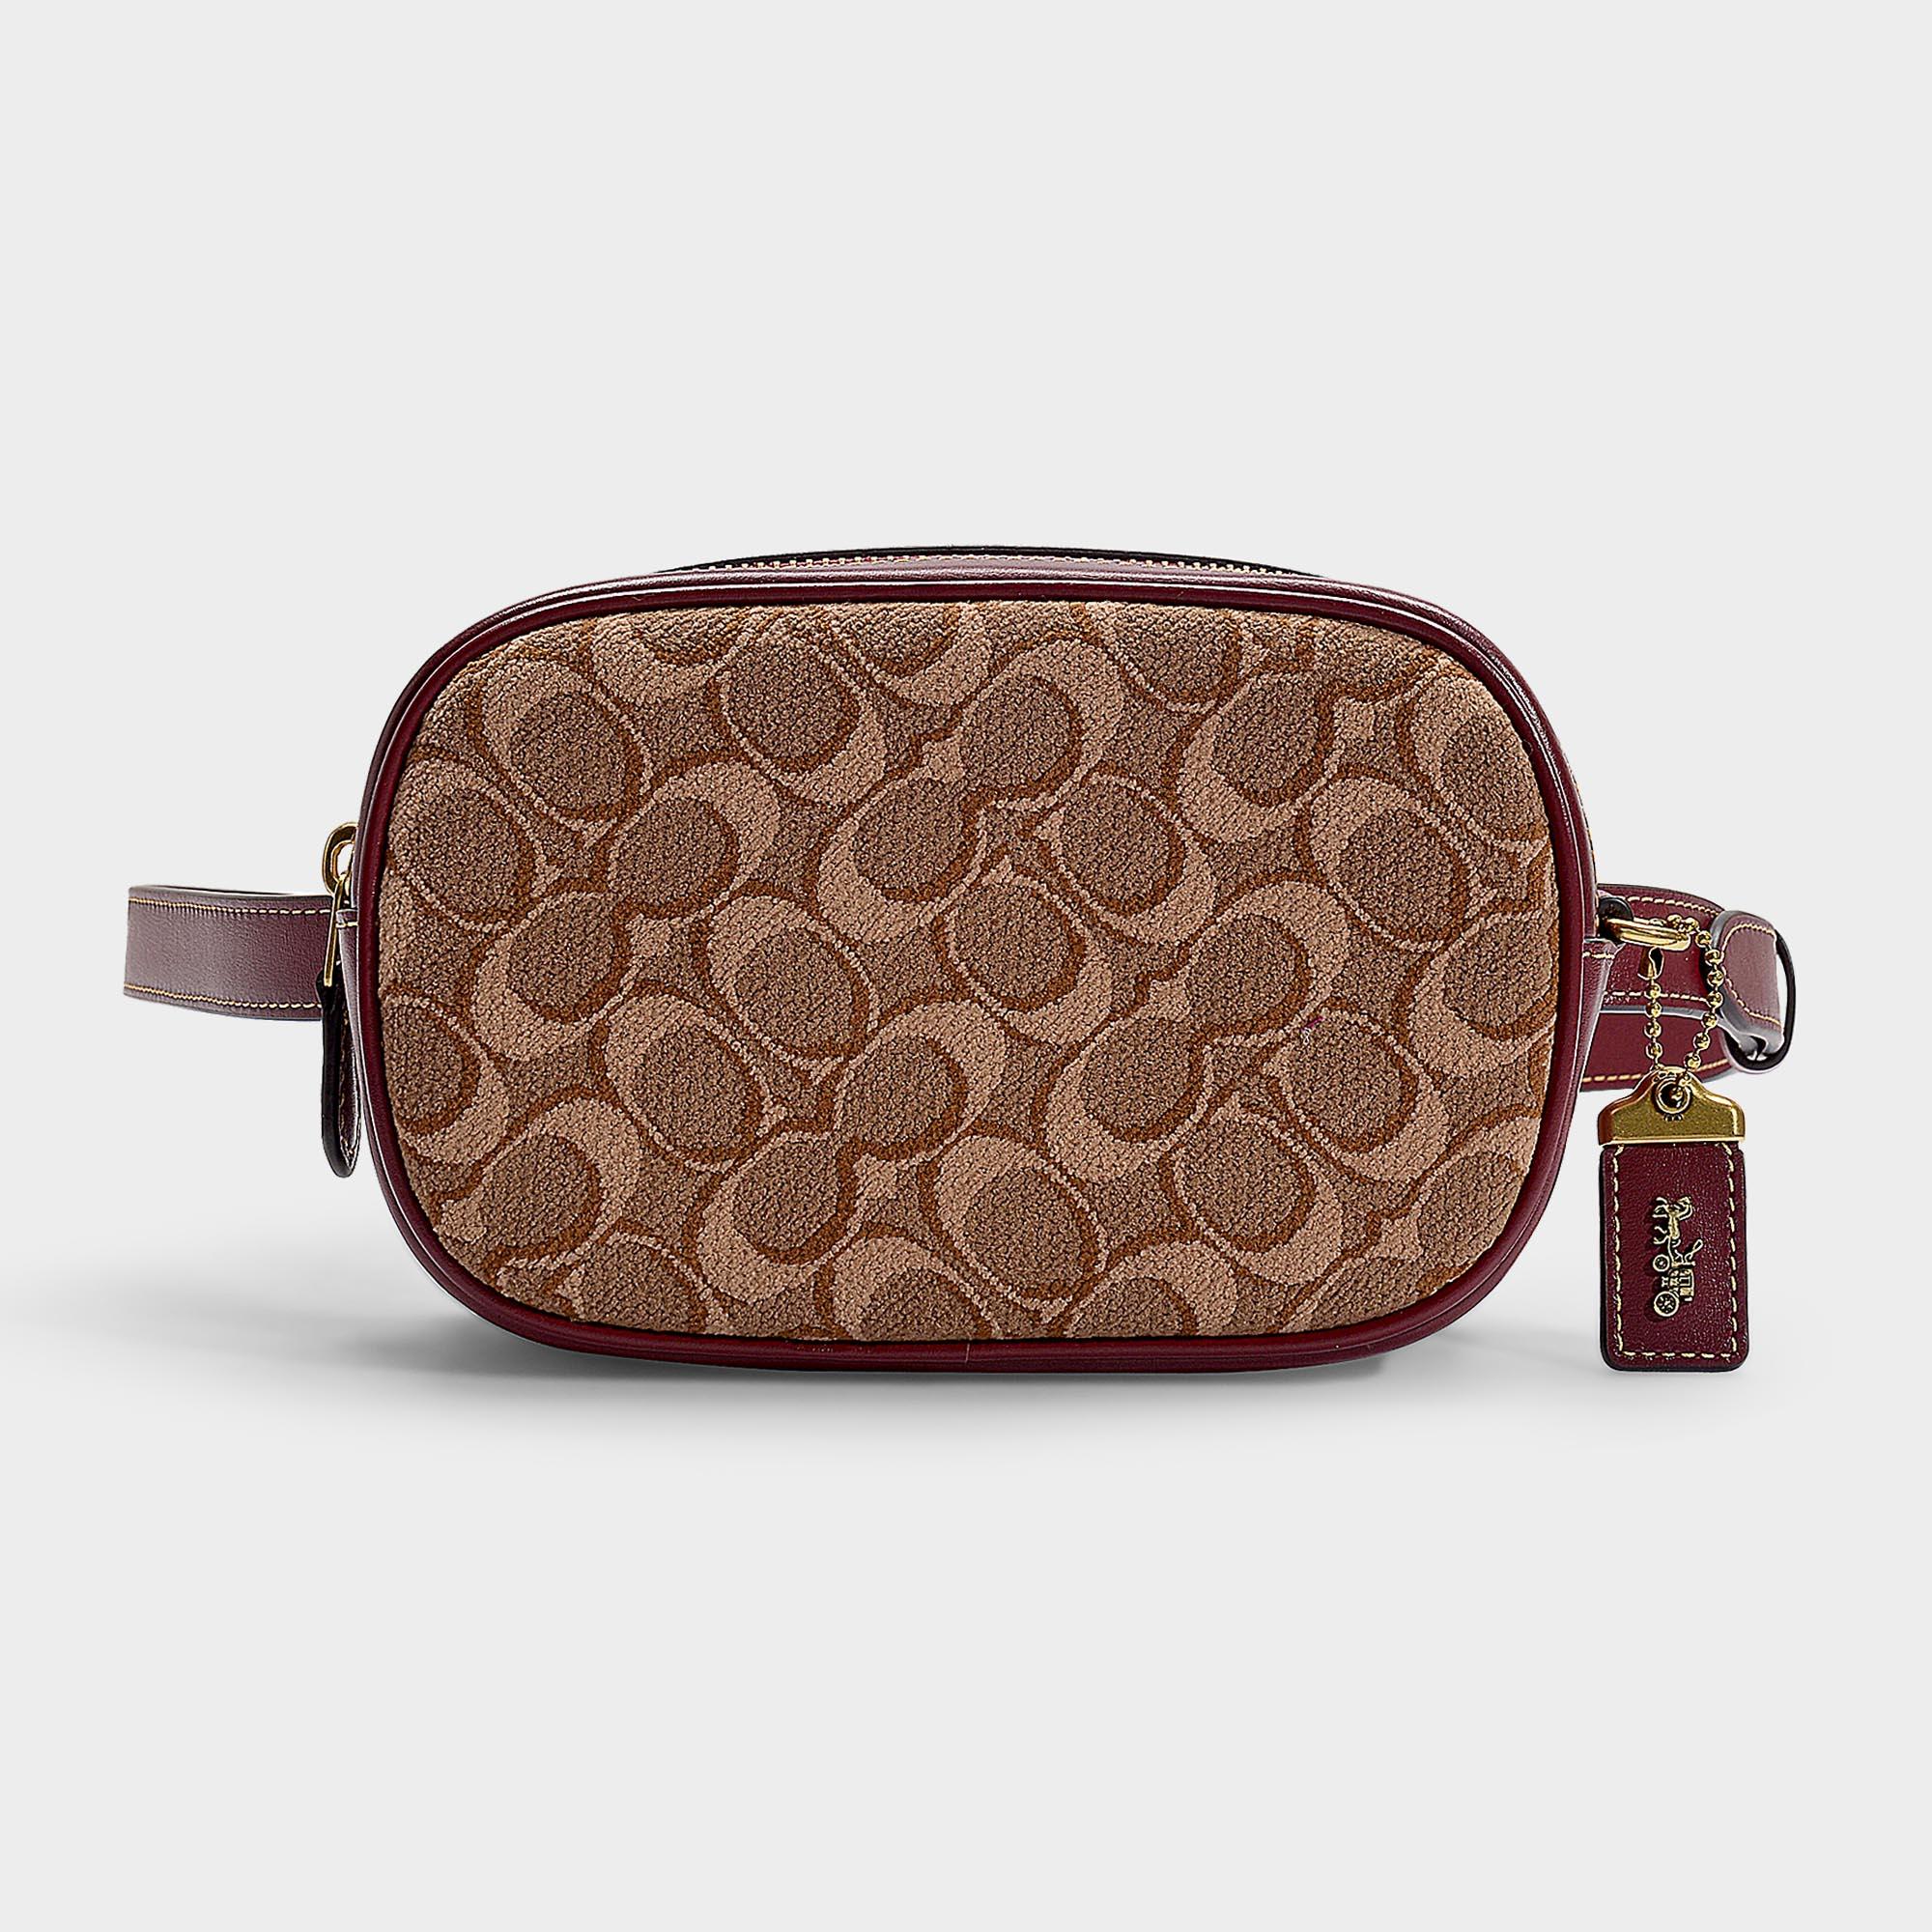 COACH Signature Jacquard Belt Bag In Tan Scarlet Leather And Coated Canvas in Natural - Save 50% ...